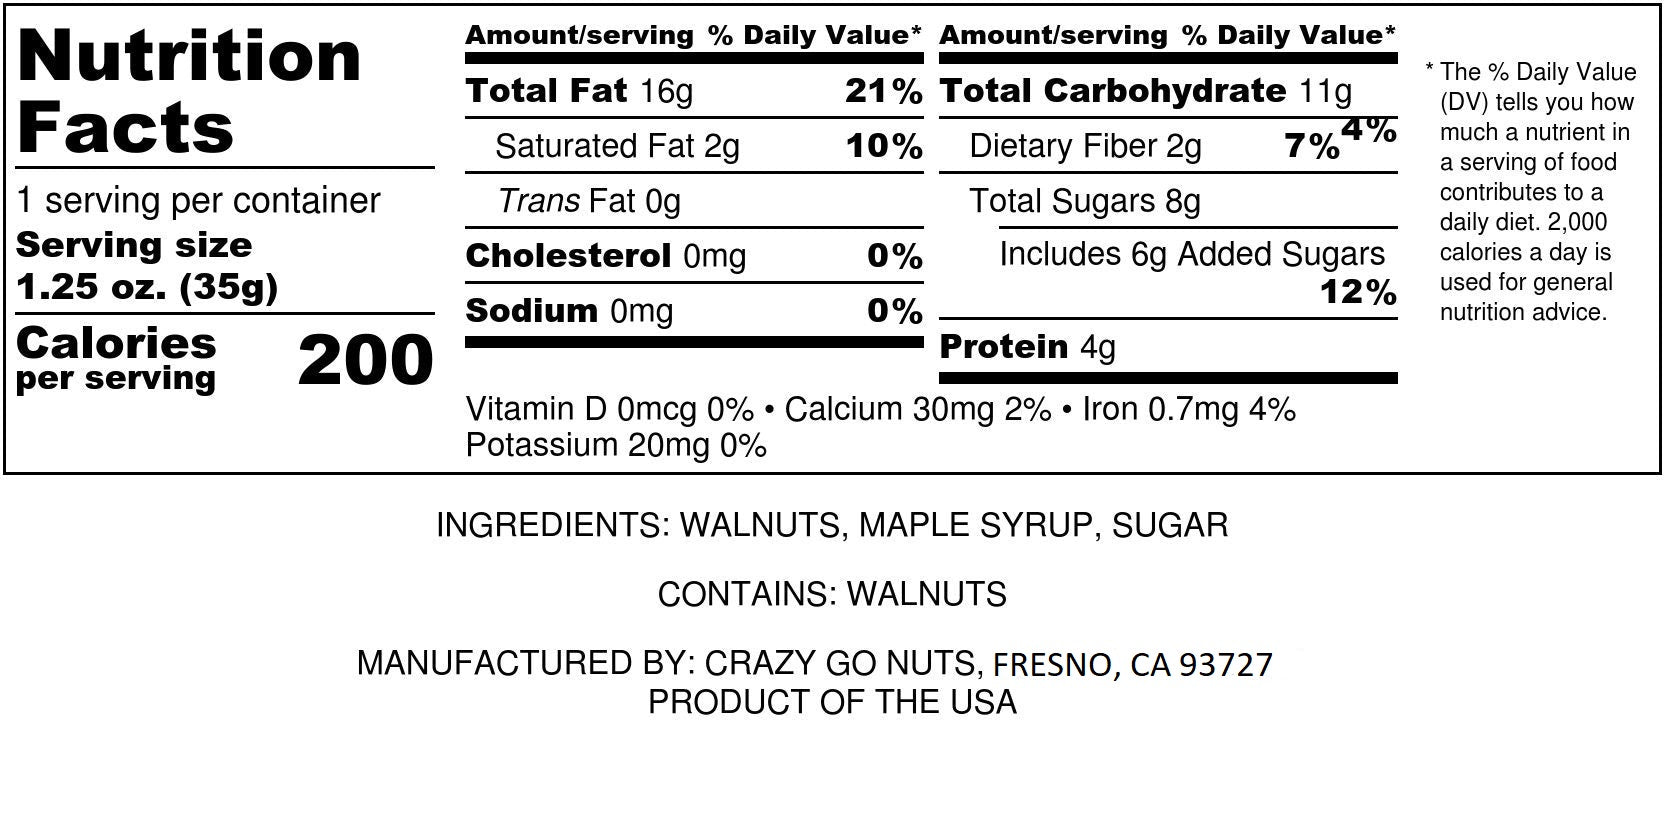 Nutrition panel for maple coated walnut snacks. Ingredients include walnuts, maple syrup, and sugar.